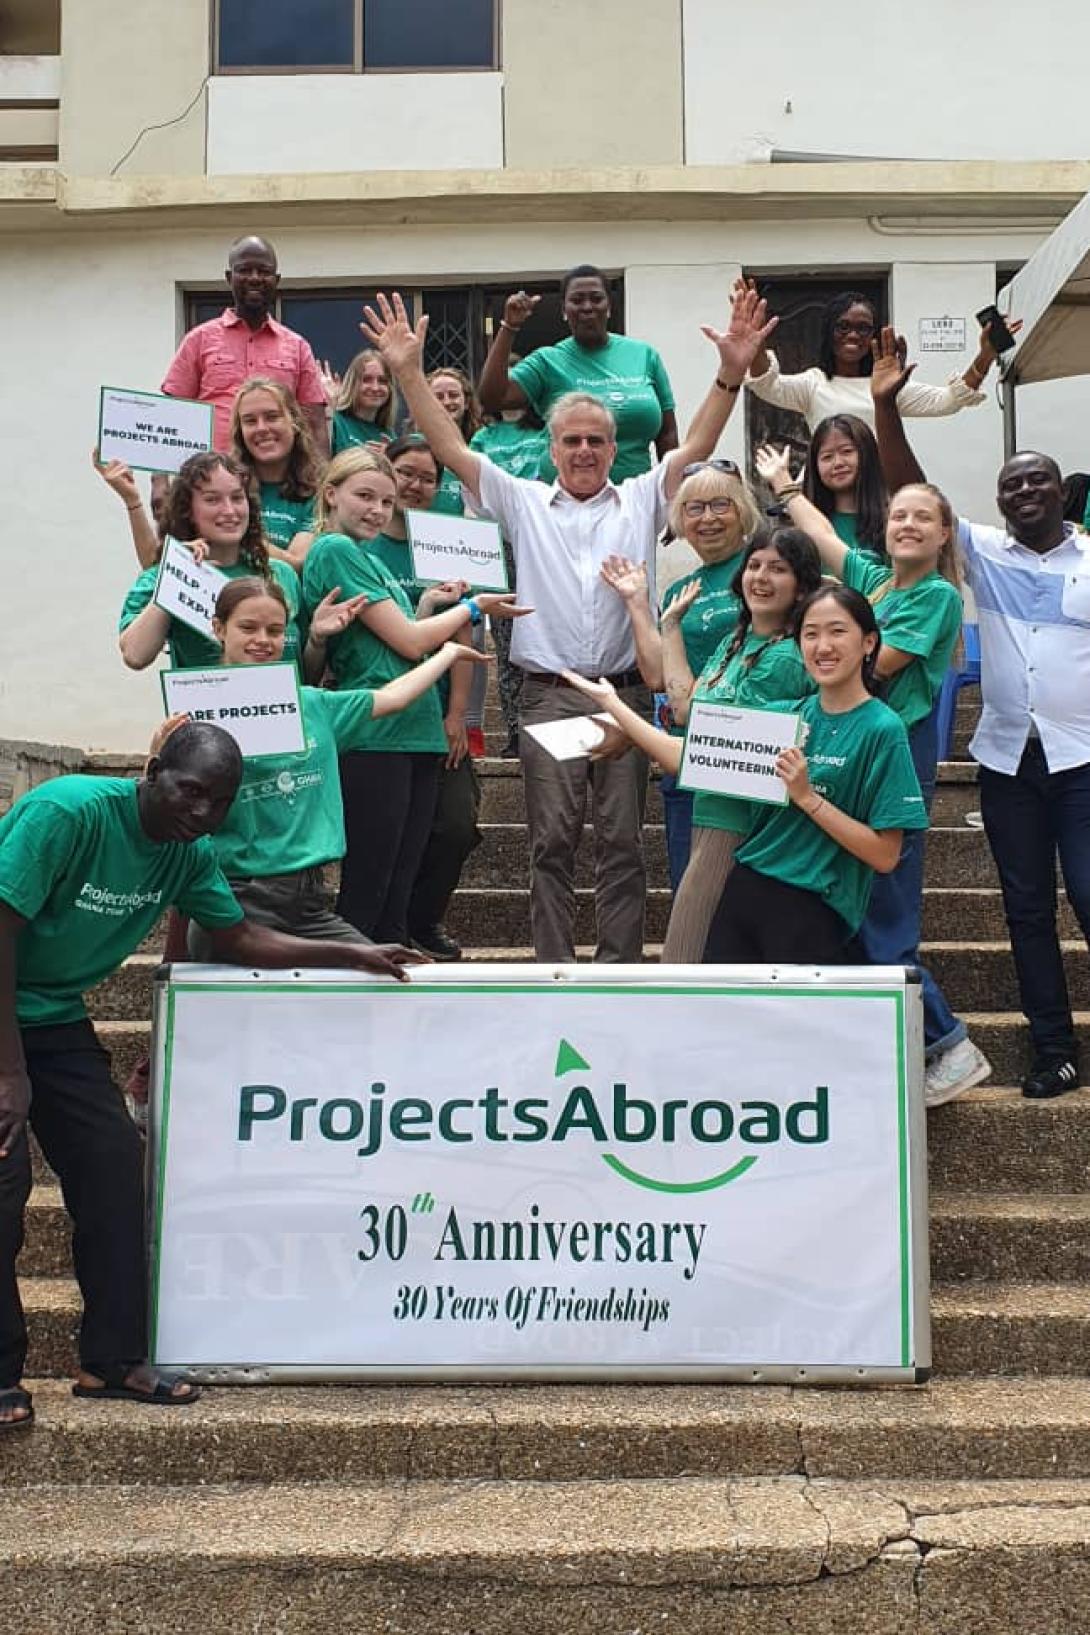 Peter Slowe celebrates Projects Abroad turning 30